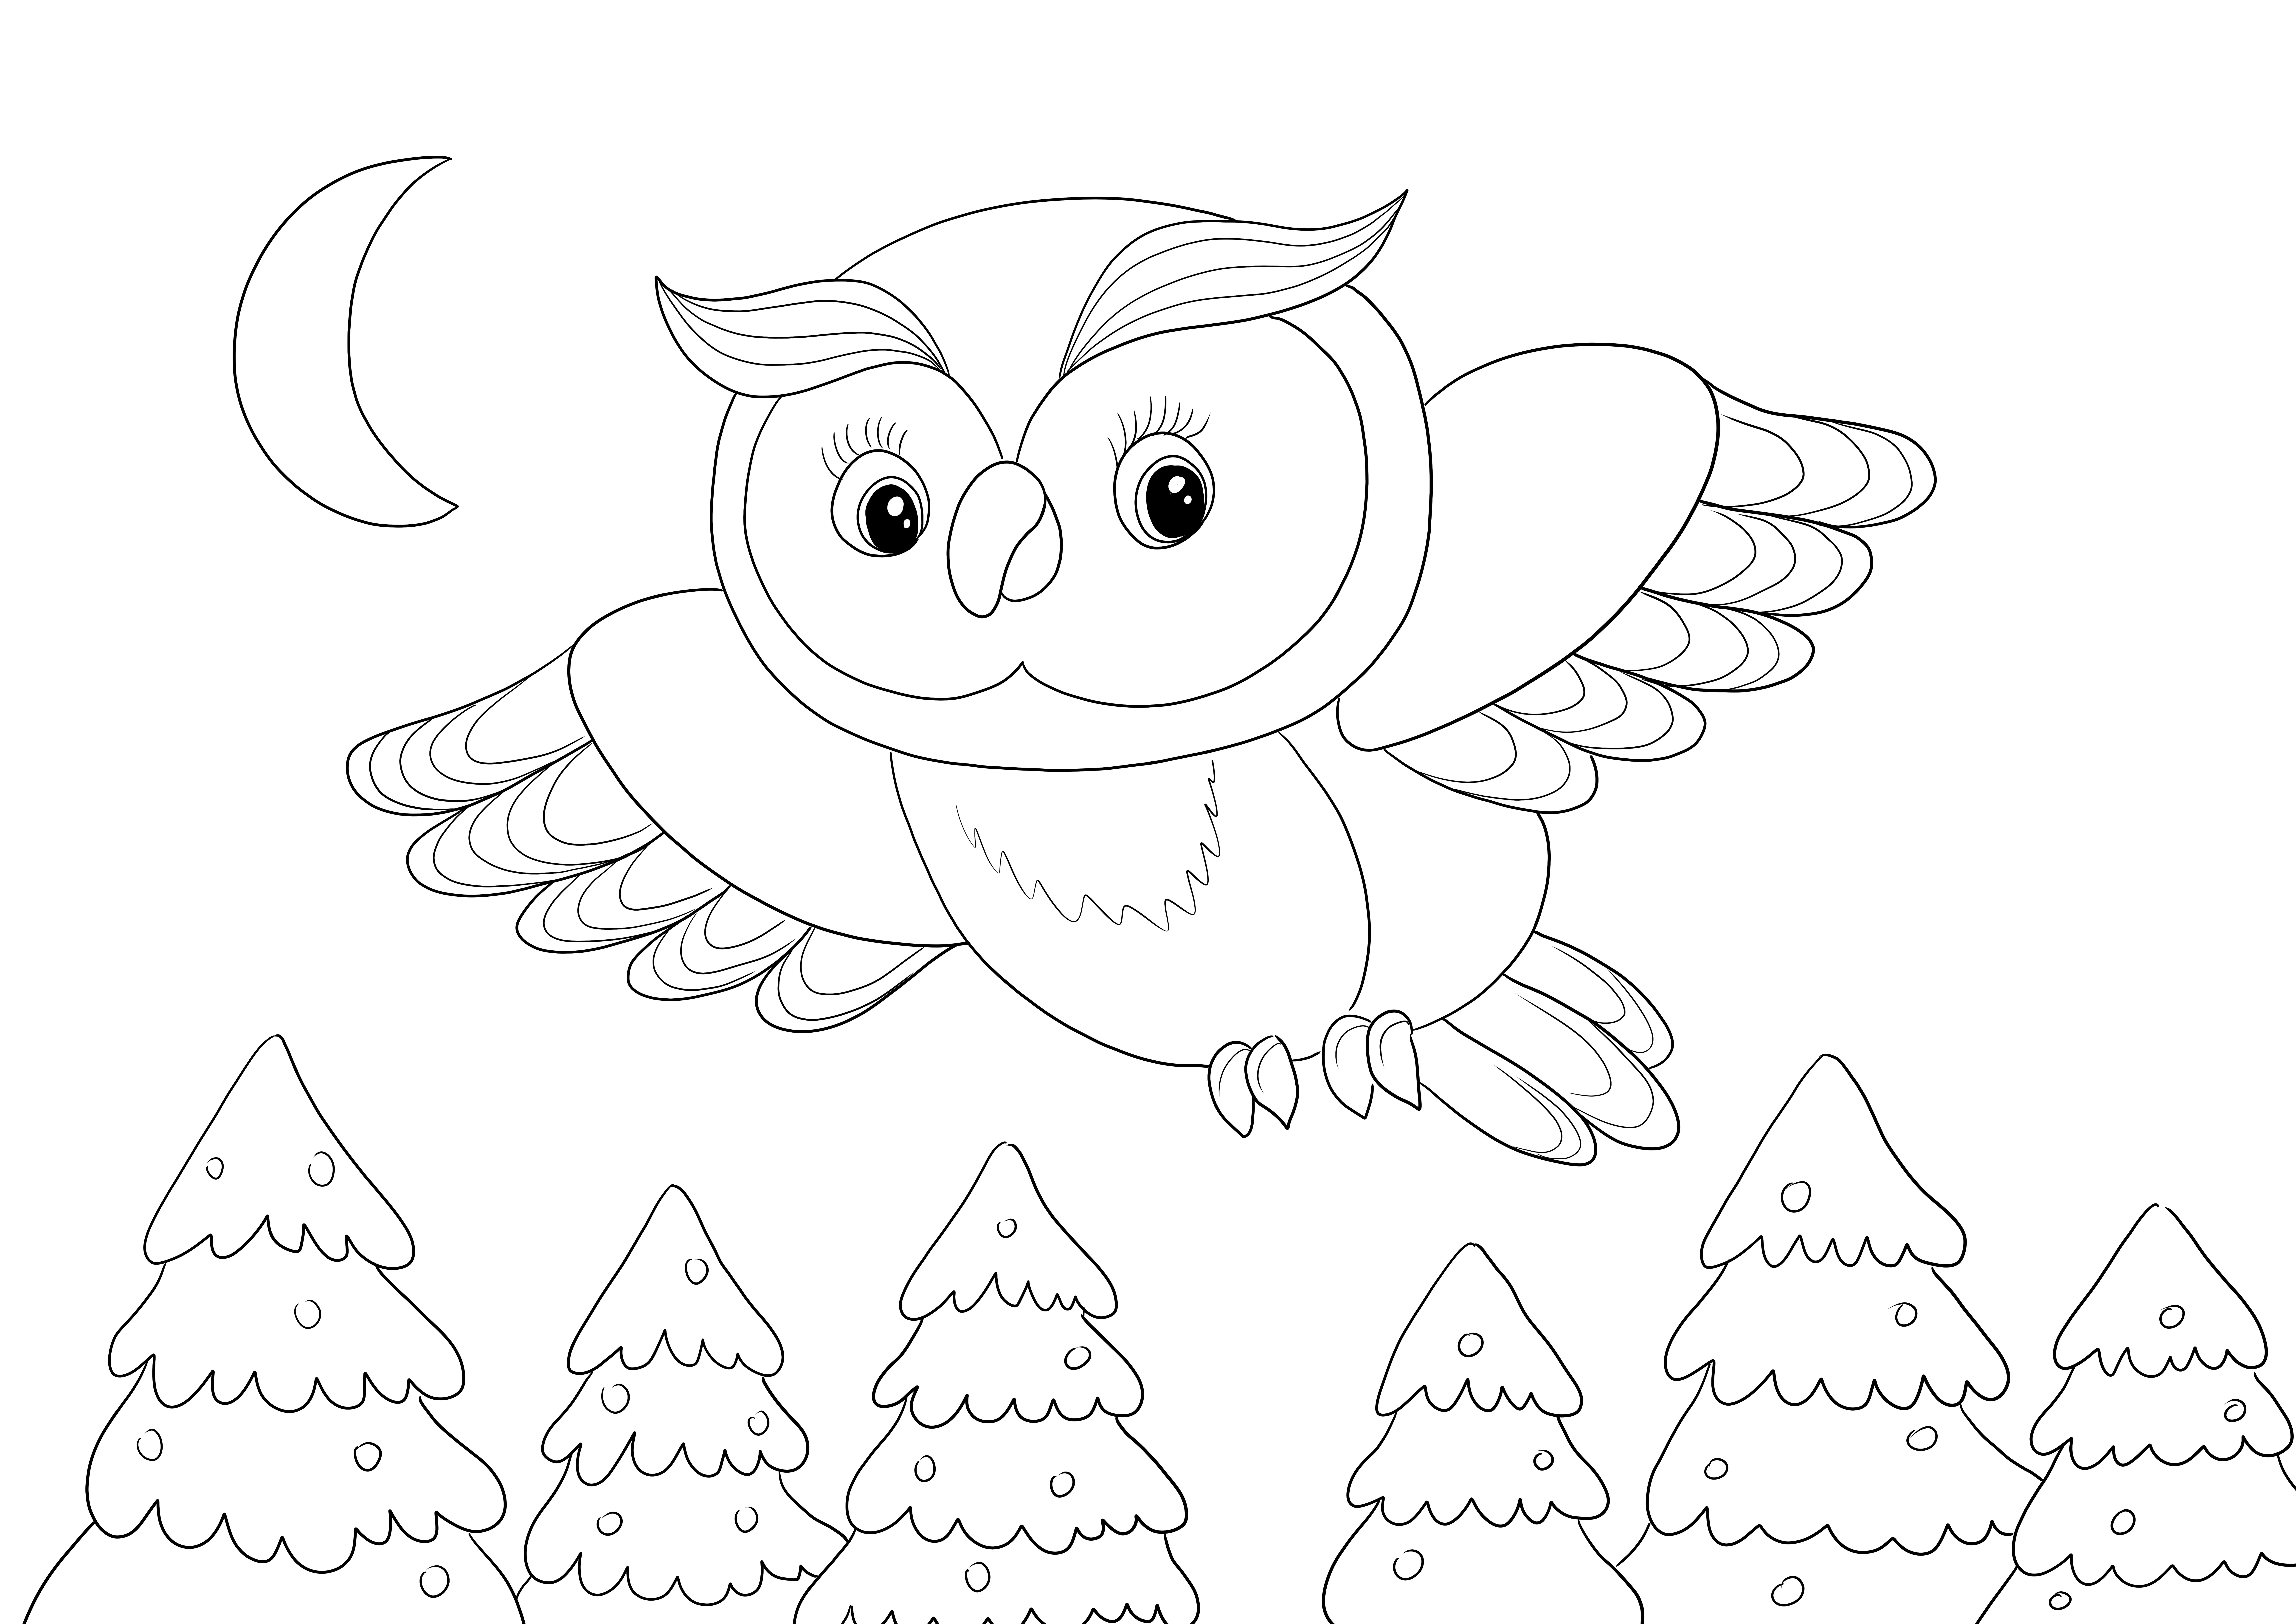 Owl flying over pine trees free printable to color or download